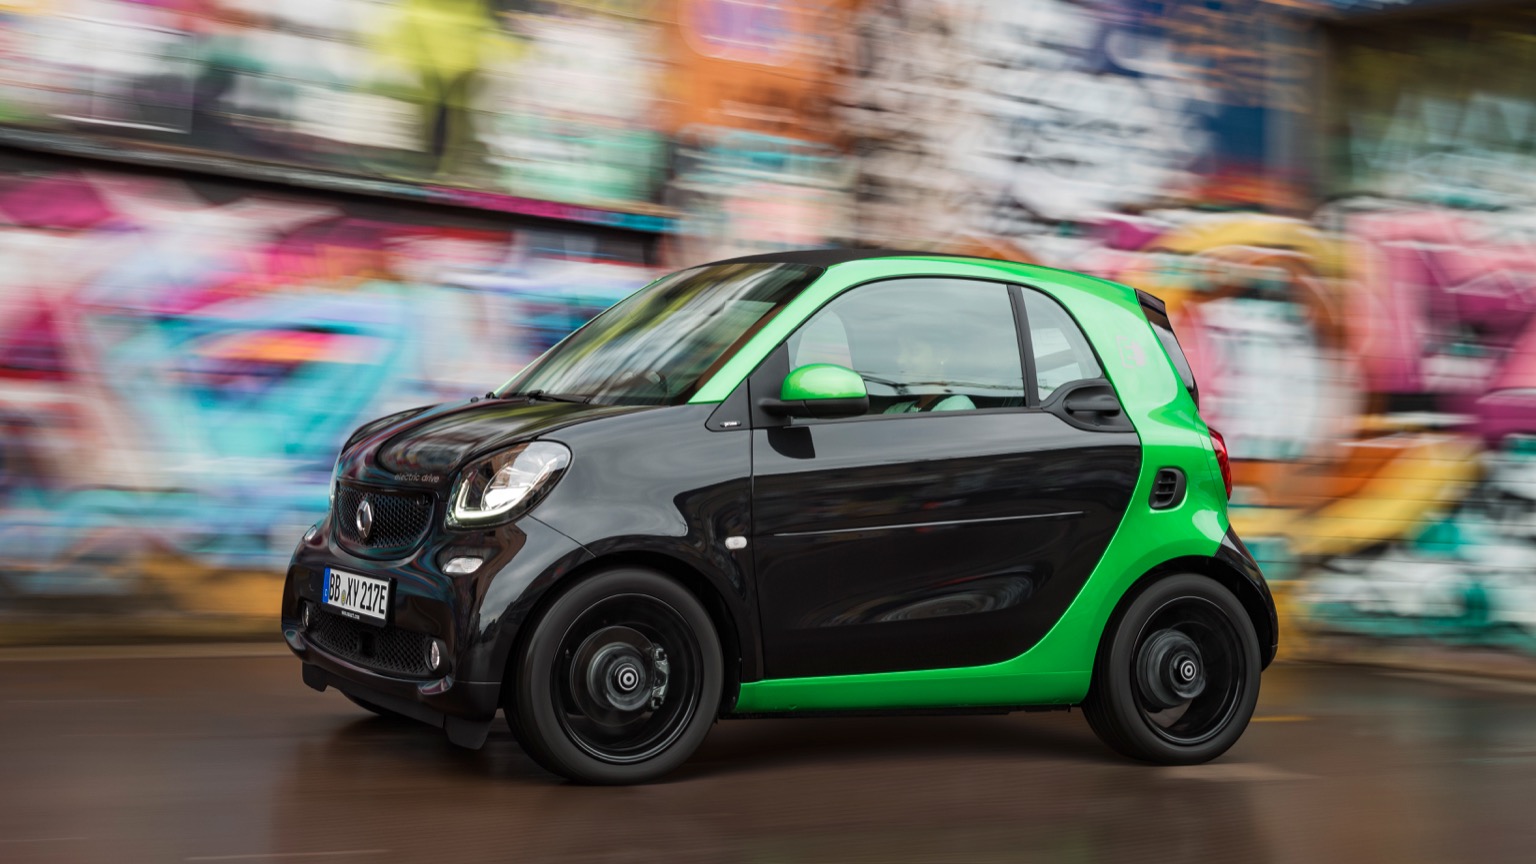 Smart_fortwo-1